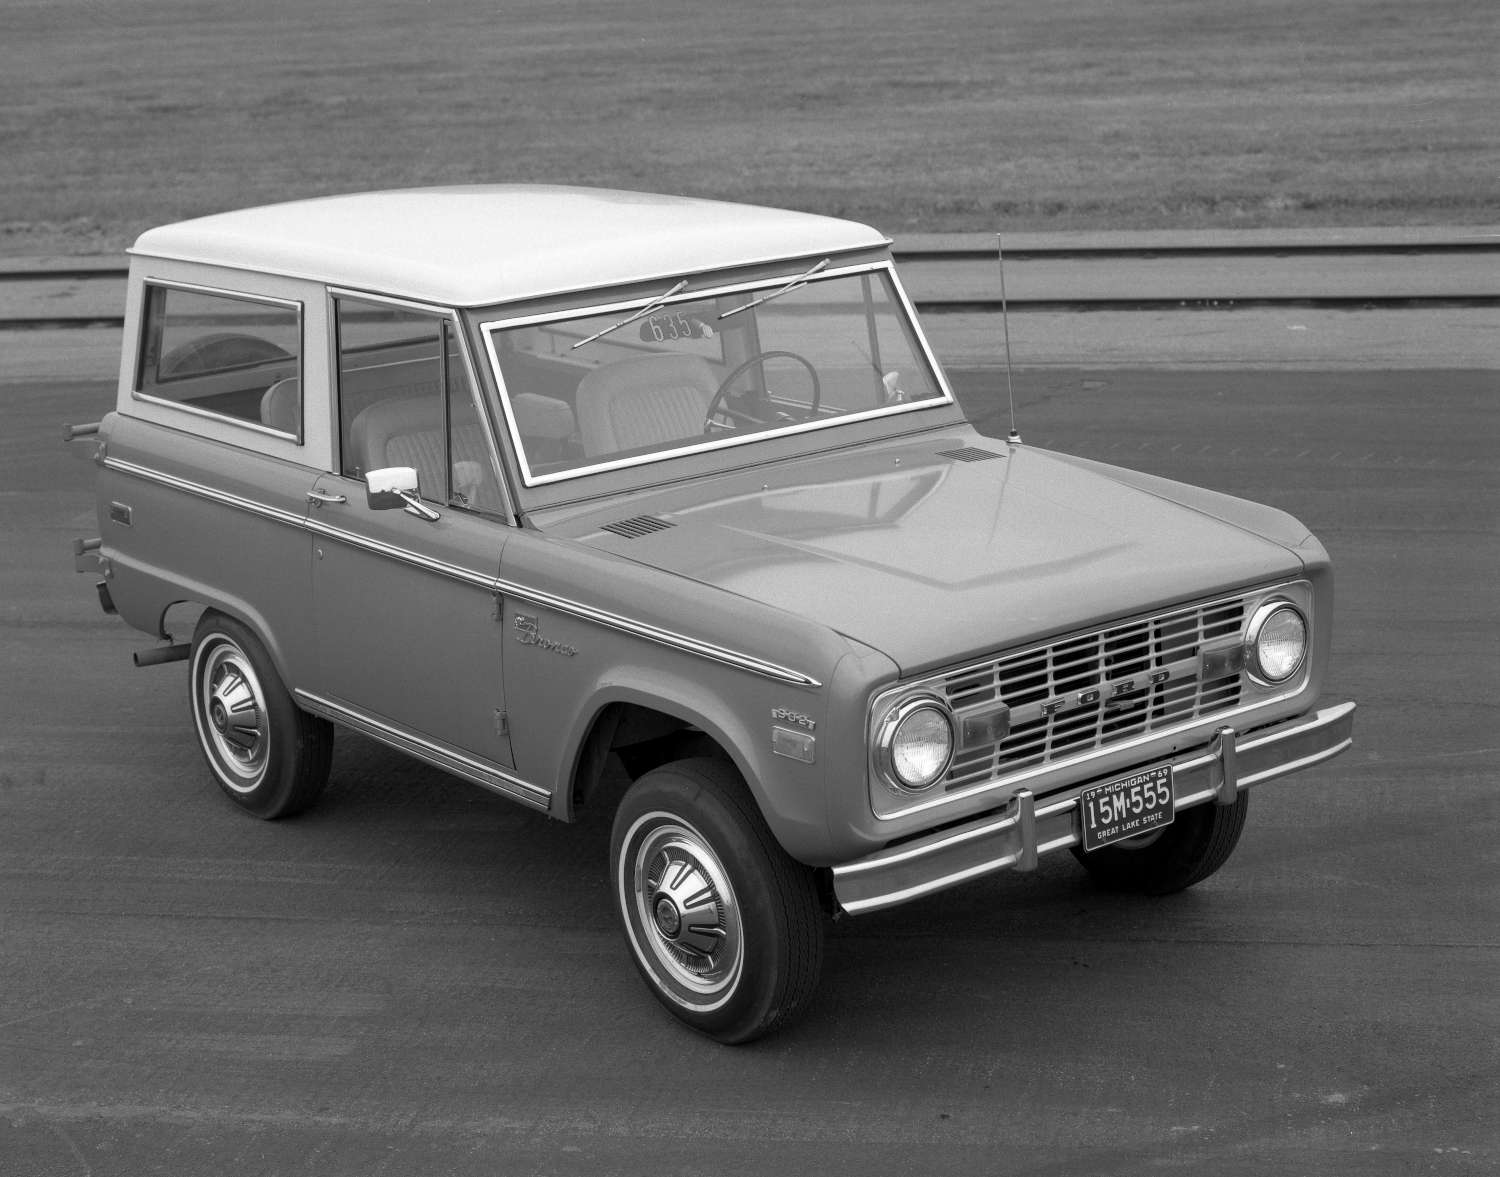 A 1970 Ford Bronco with a white roof